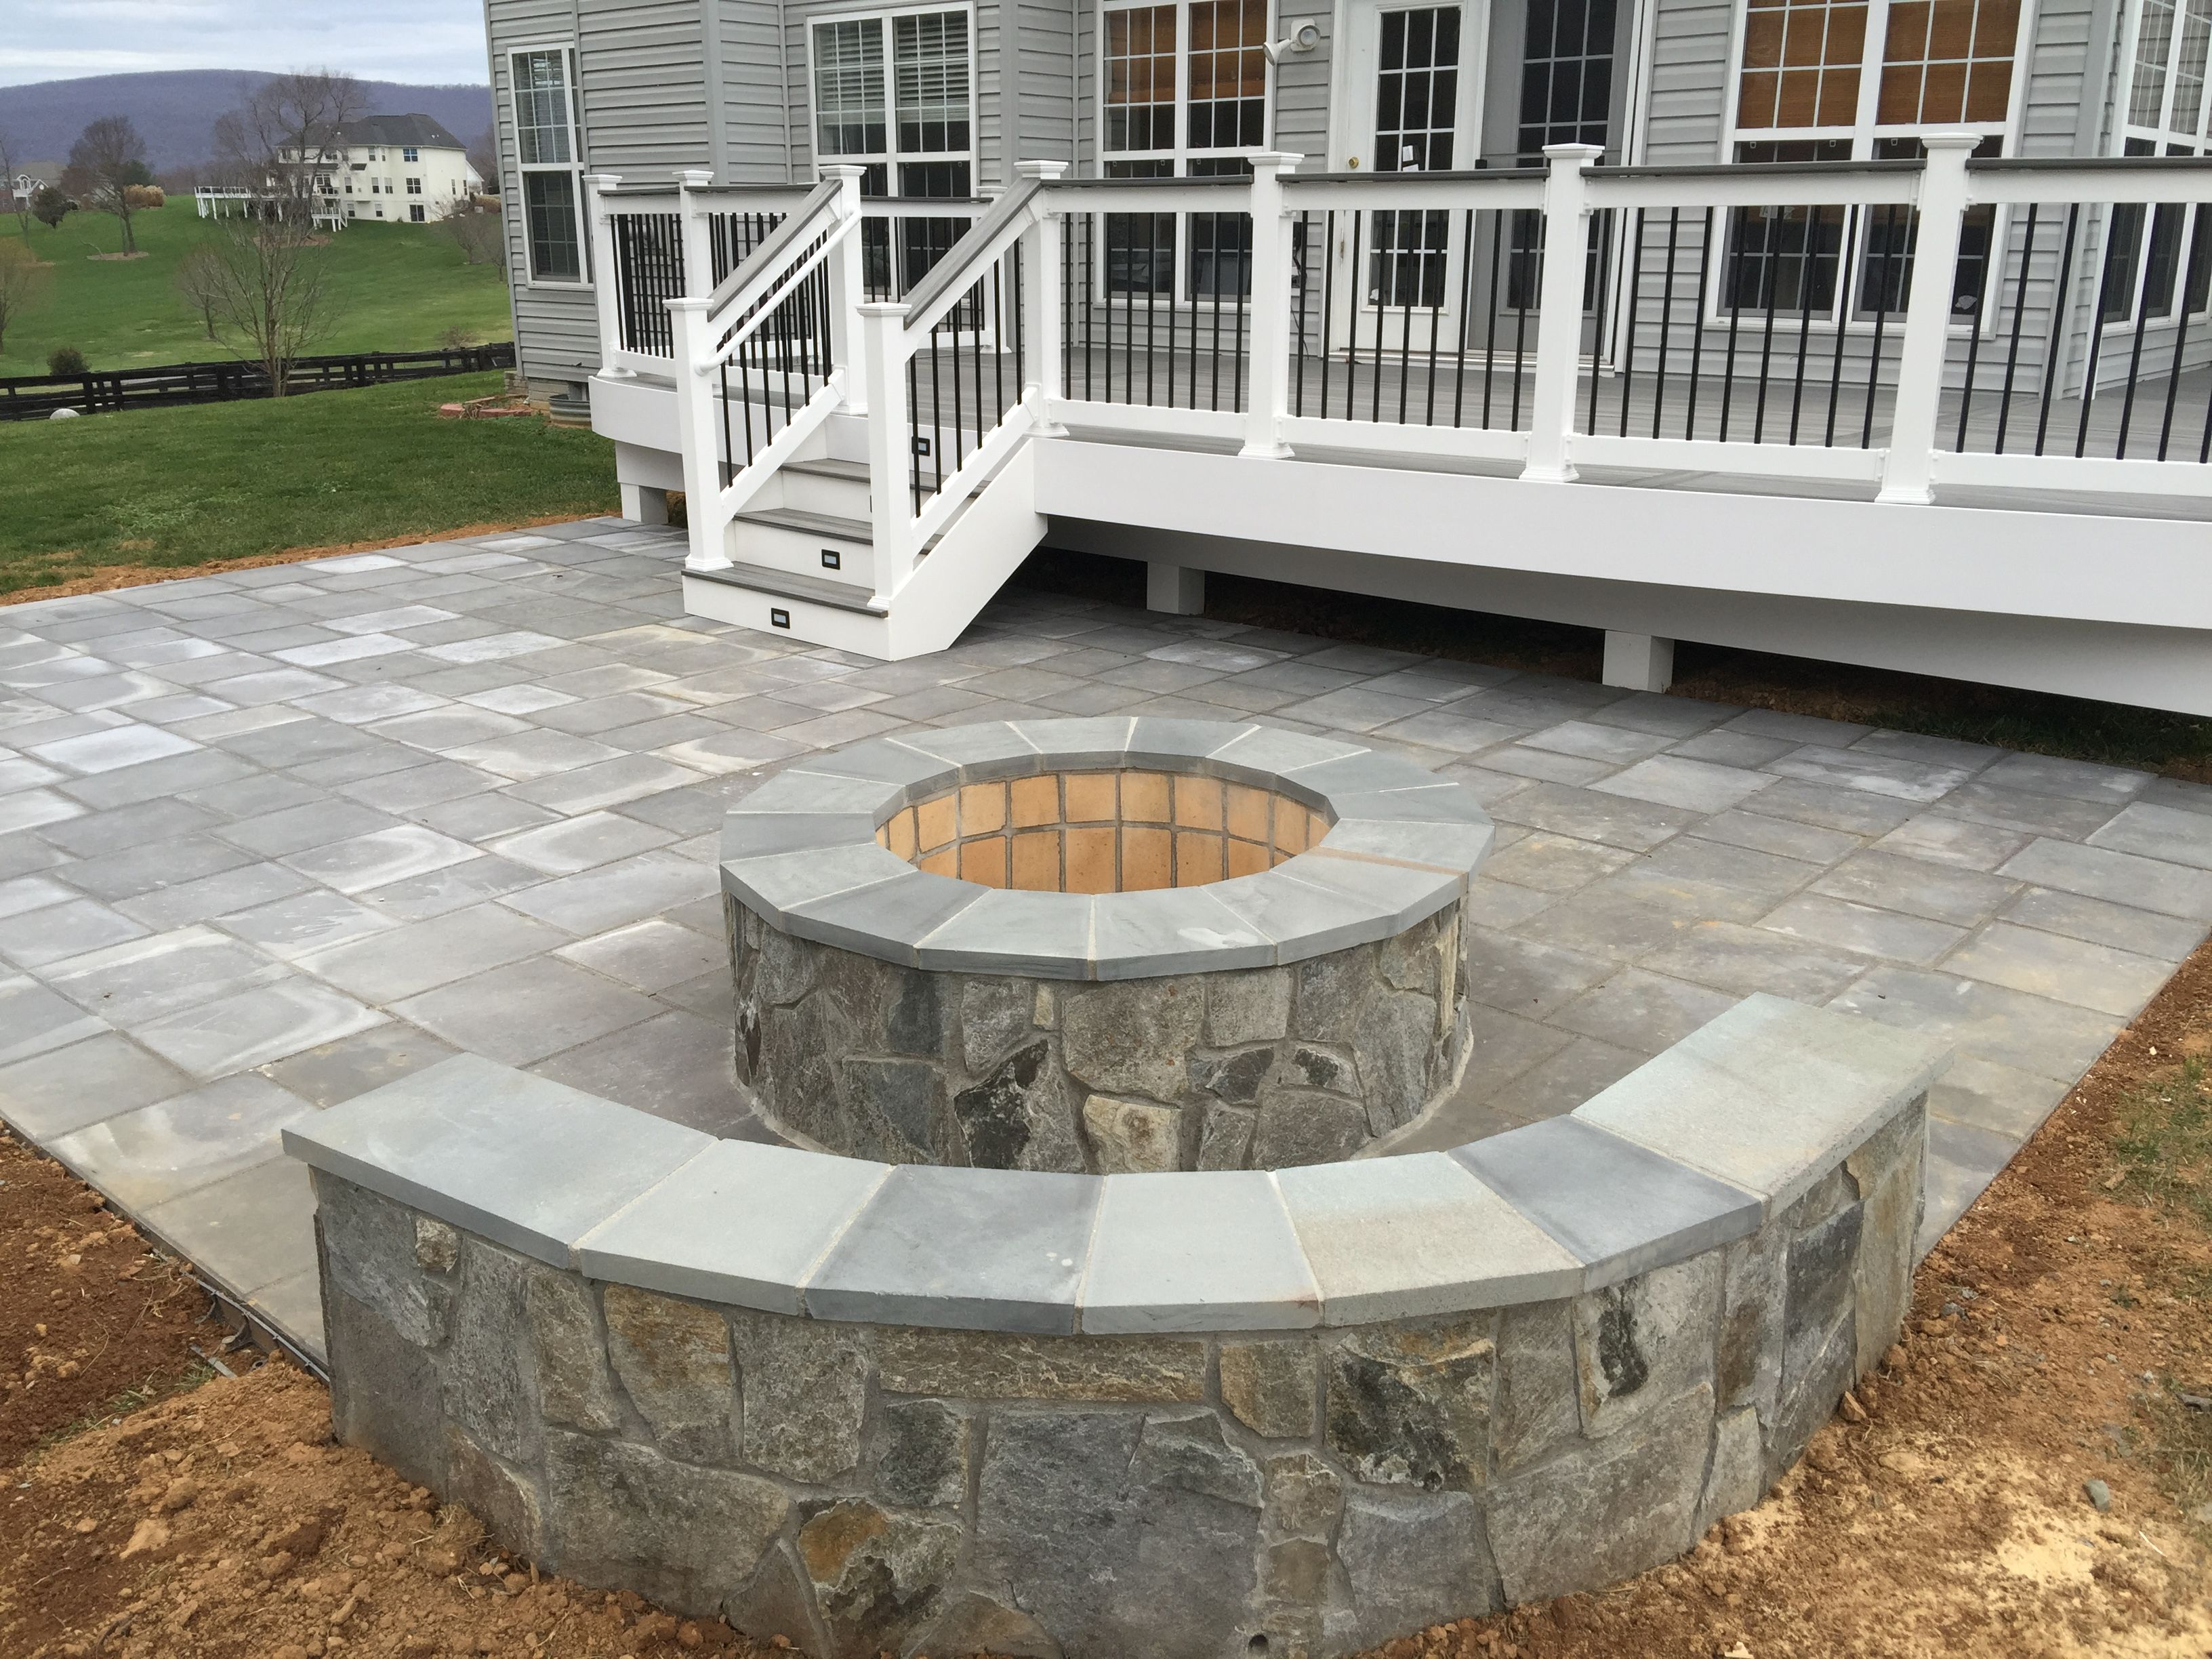 A Beautiful Paver Patio With Stone Seating Walls And A Fire within size 3264 X 2448